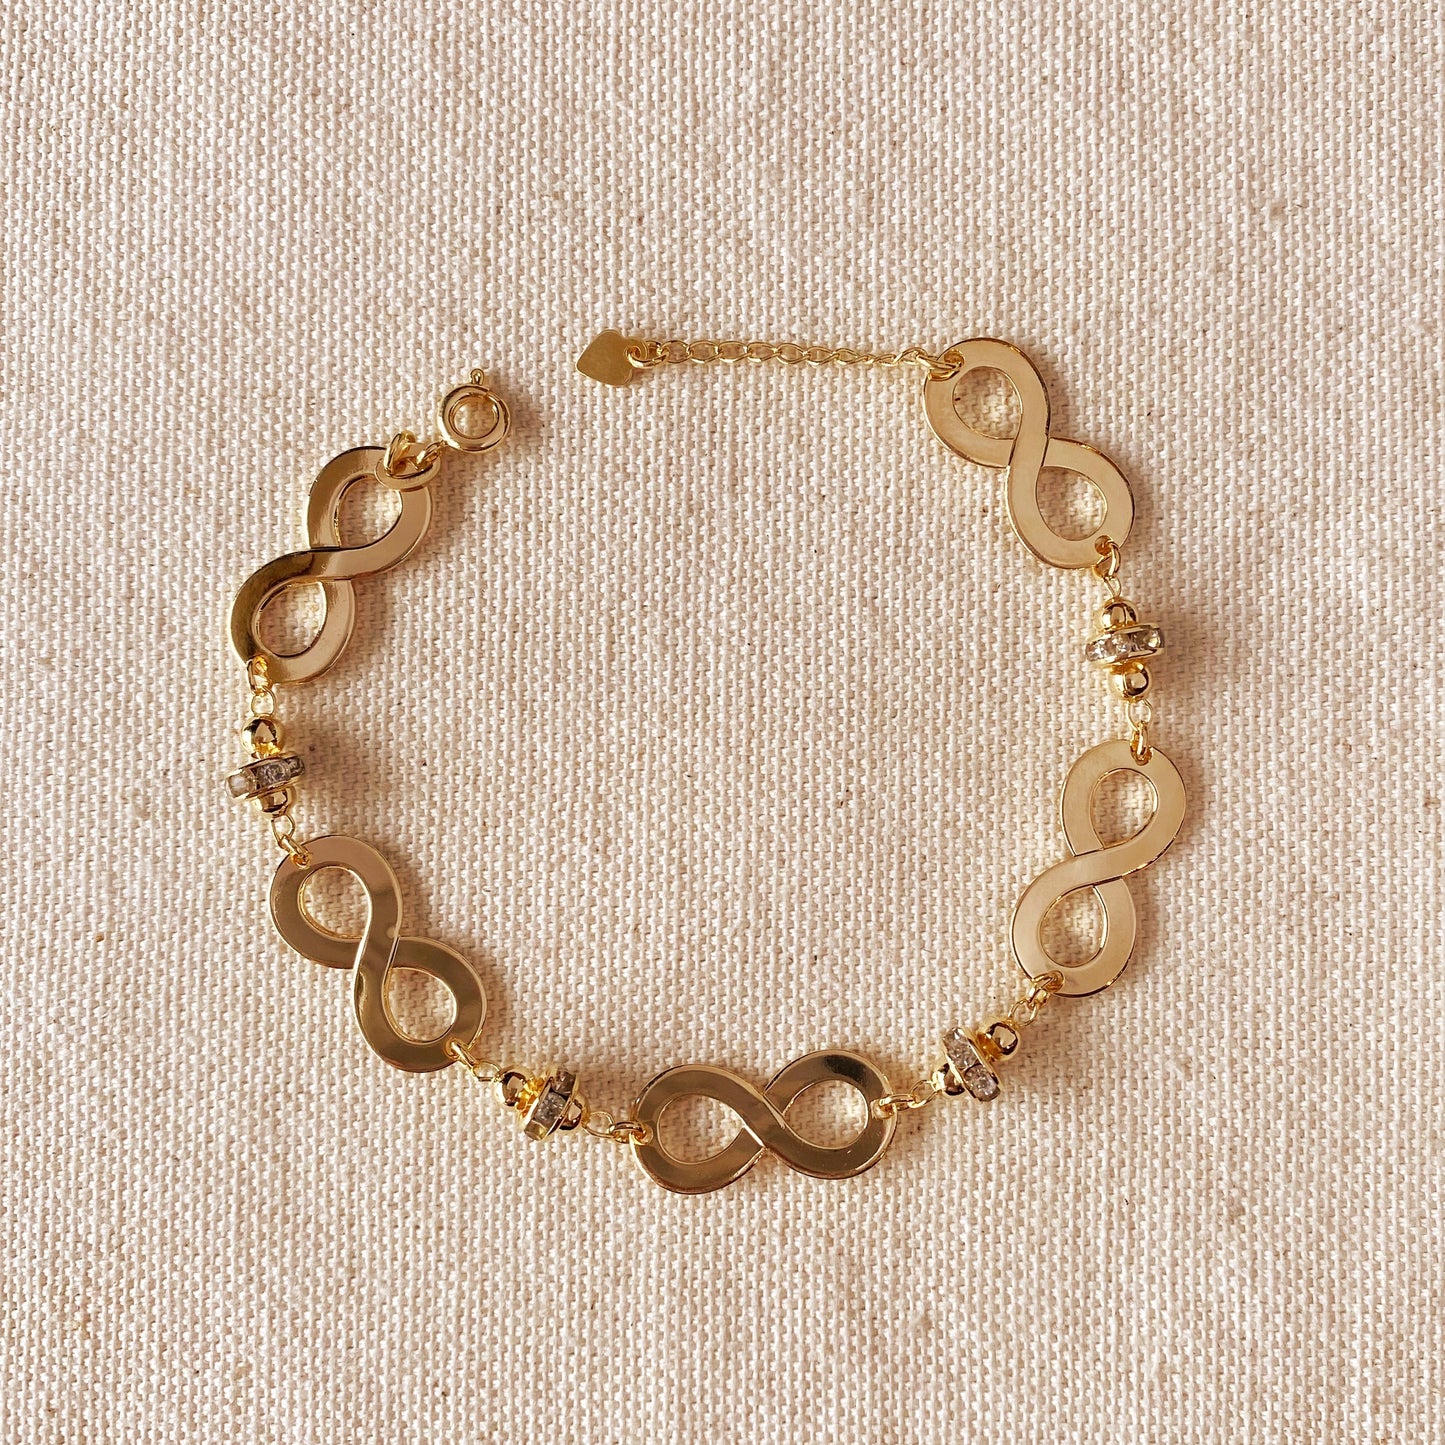 18k Gold Filled Infinity Bracelet With Crystal Beads